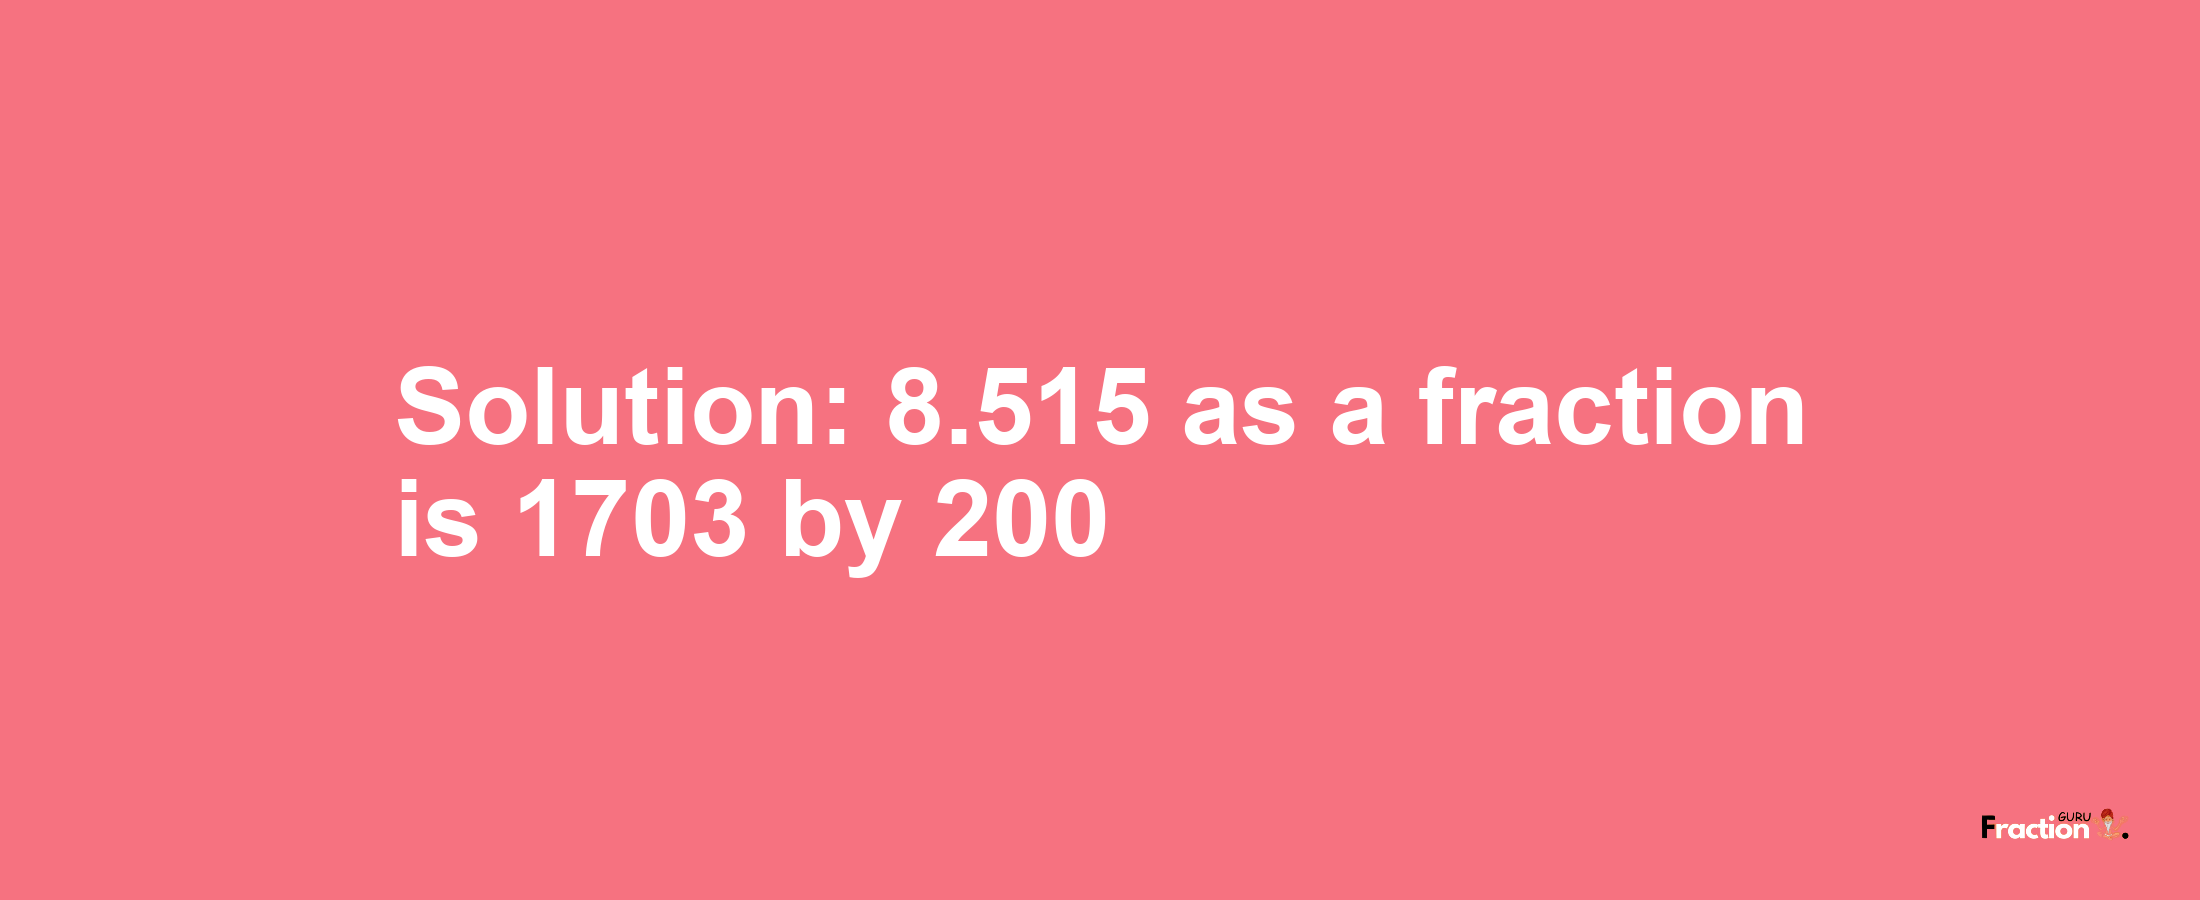 Solution:8.515 as a fraction is 1703/200